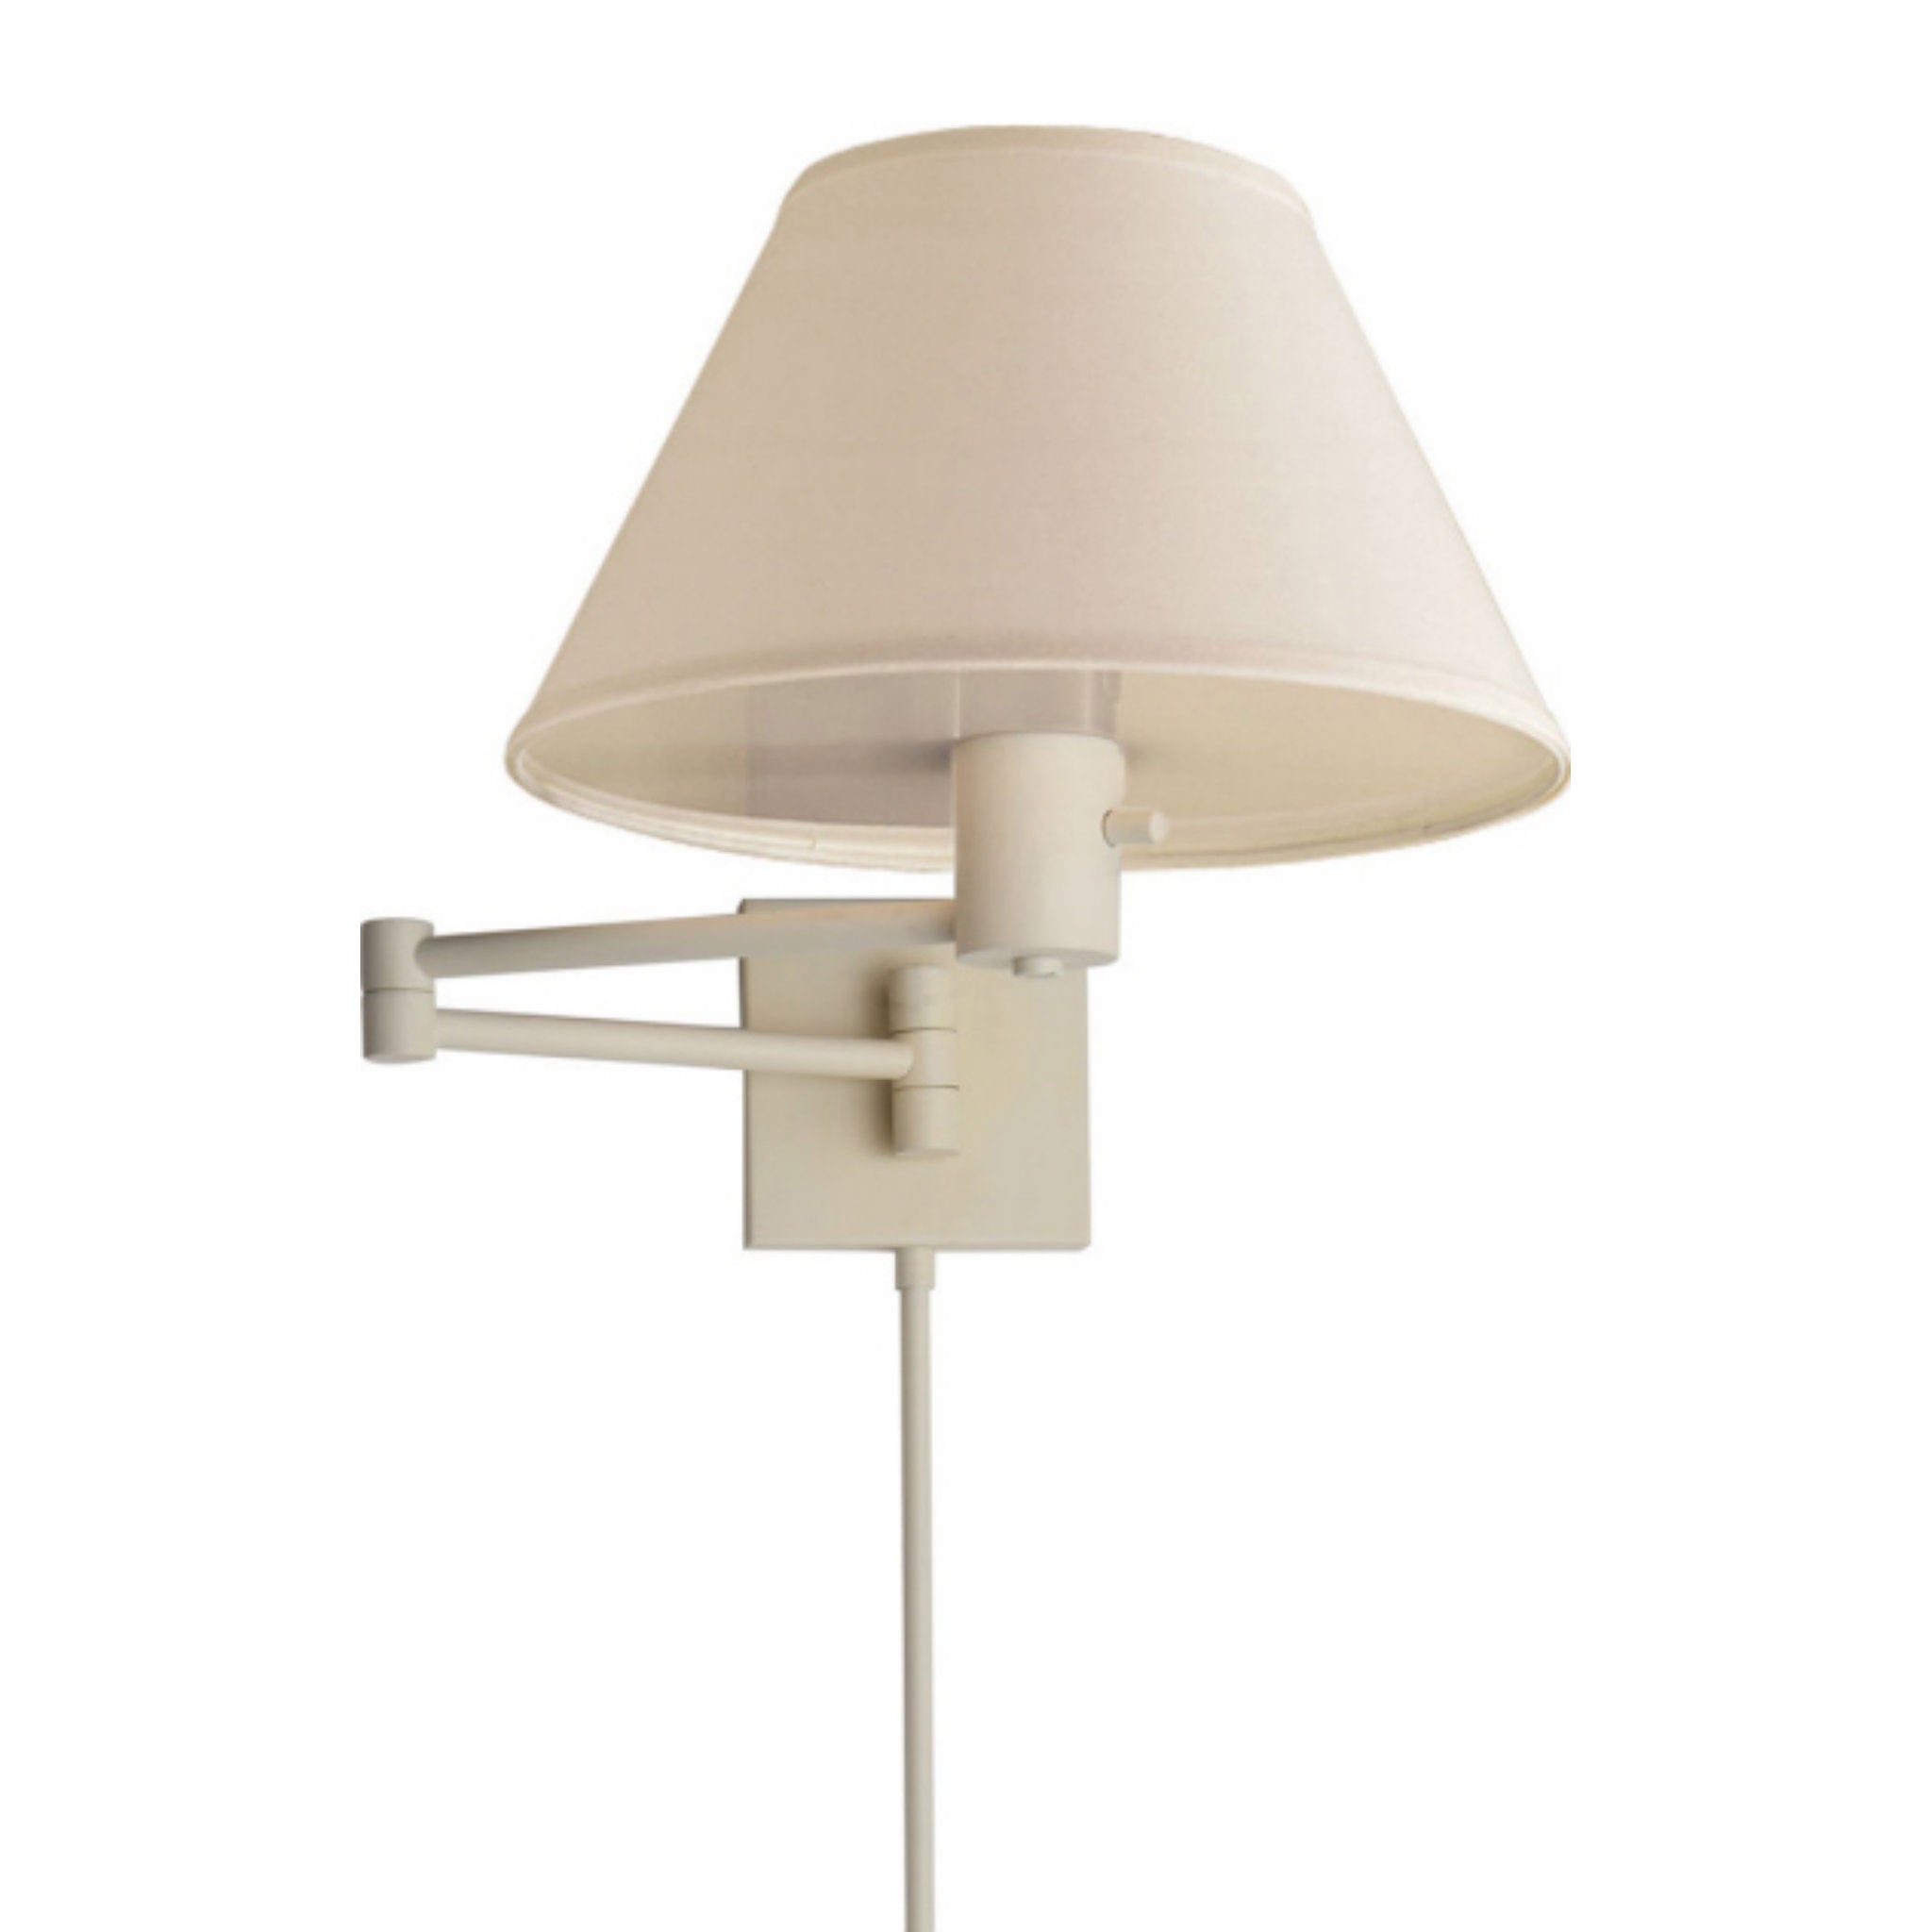 Visual Comfort Classic Swing Arm Wall Lamp in White with Linen Shade